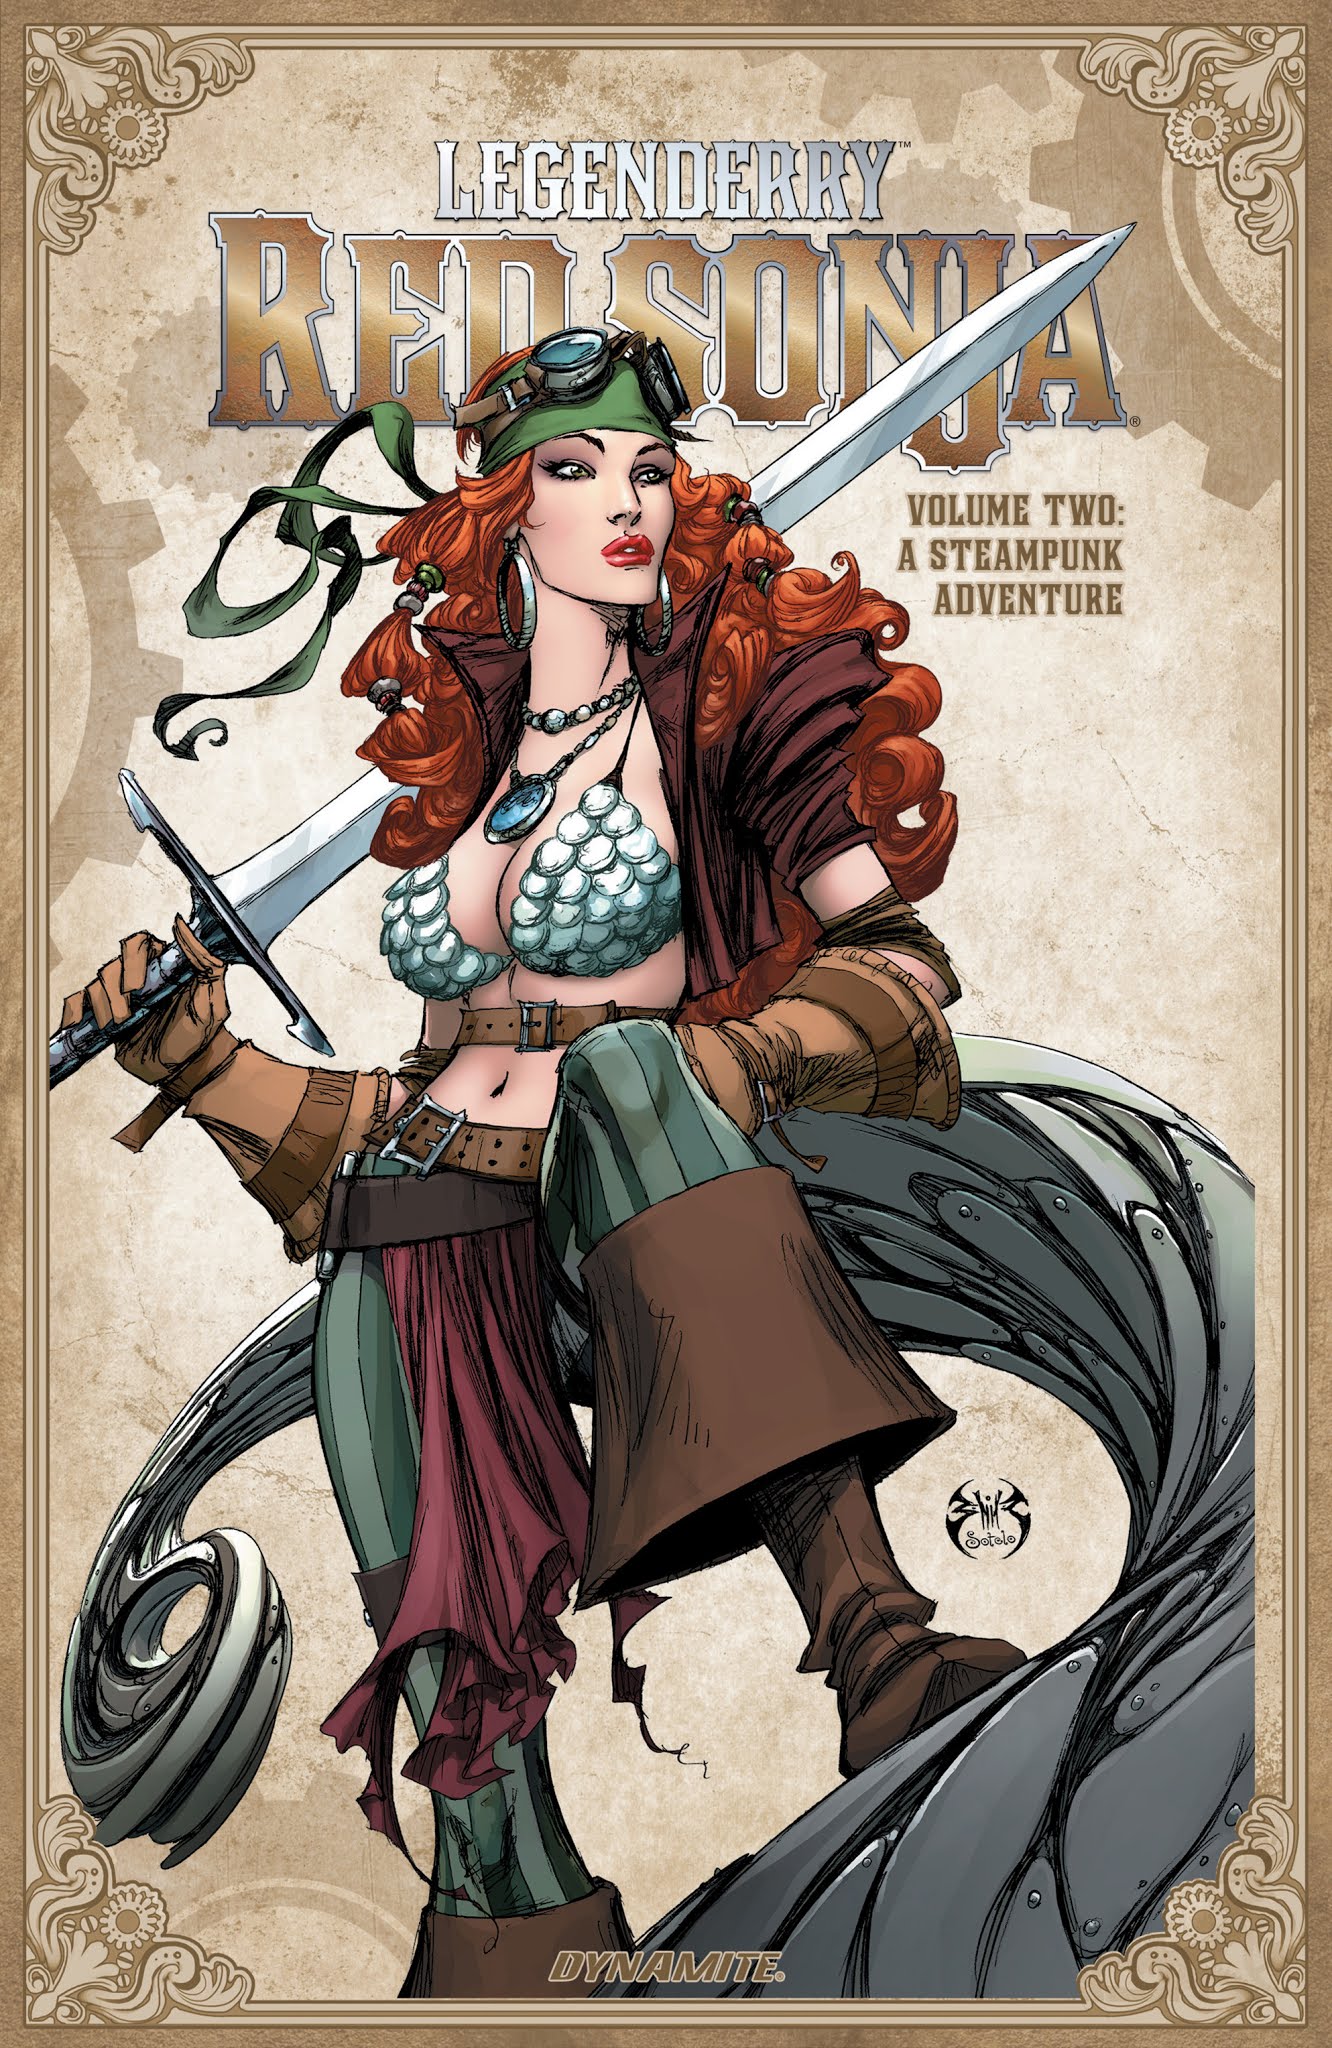 Read online Legenderry Red Sonja comic -  Issue # _TPB - 1